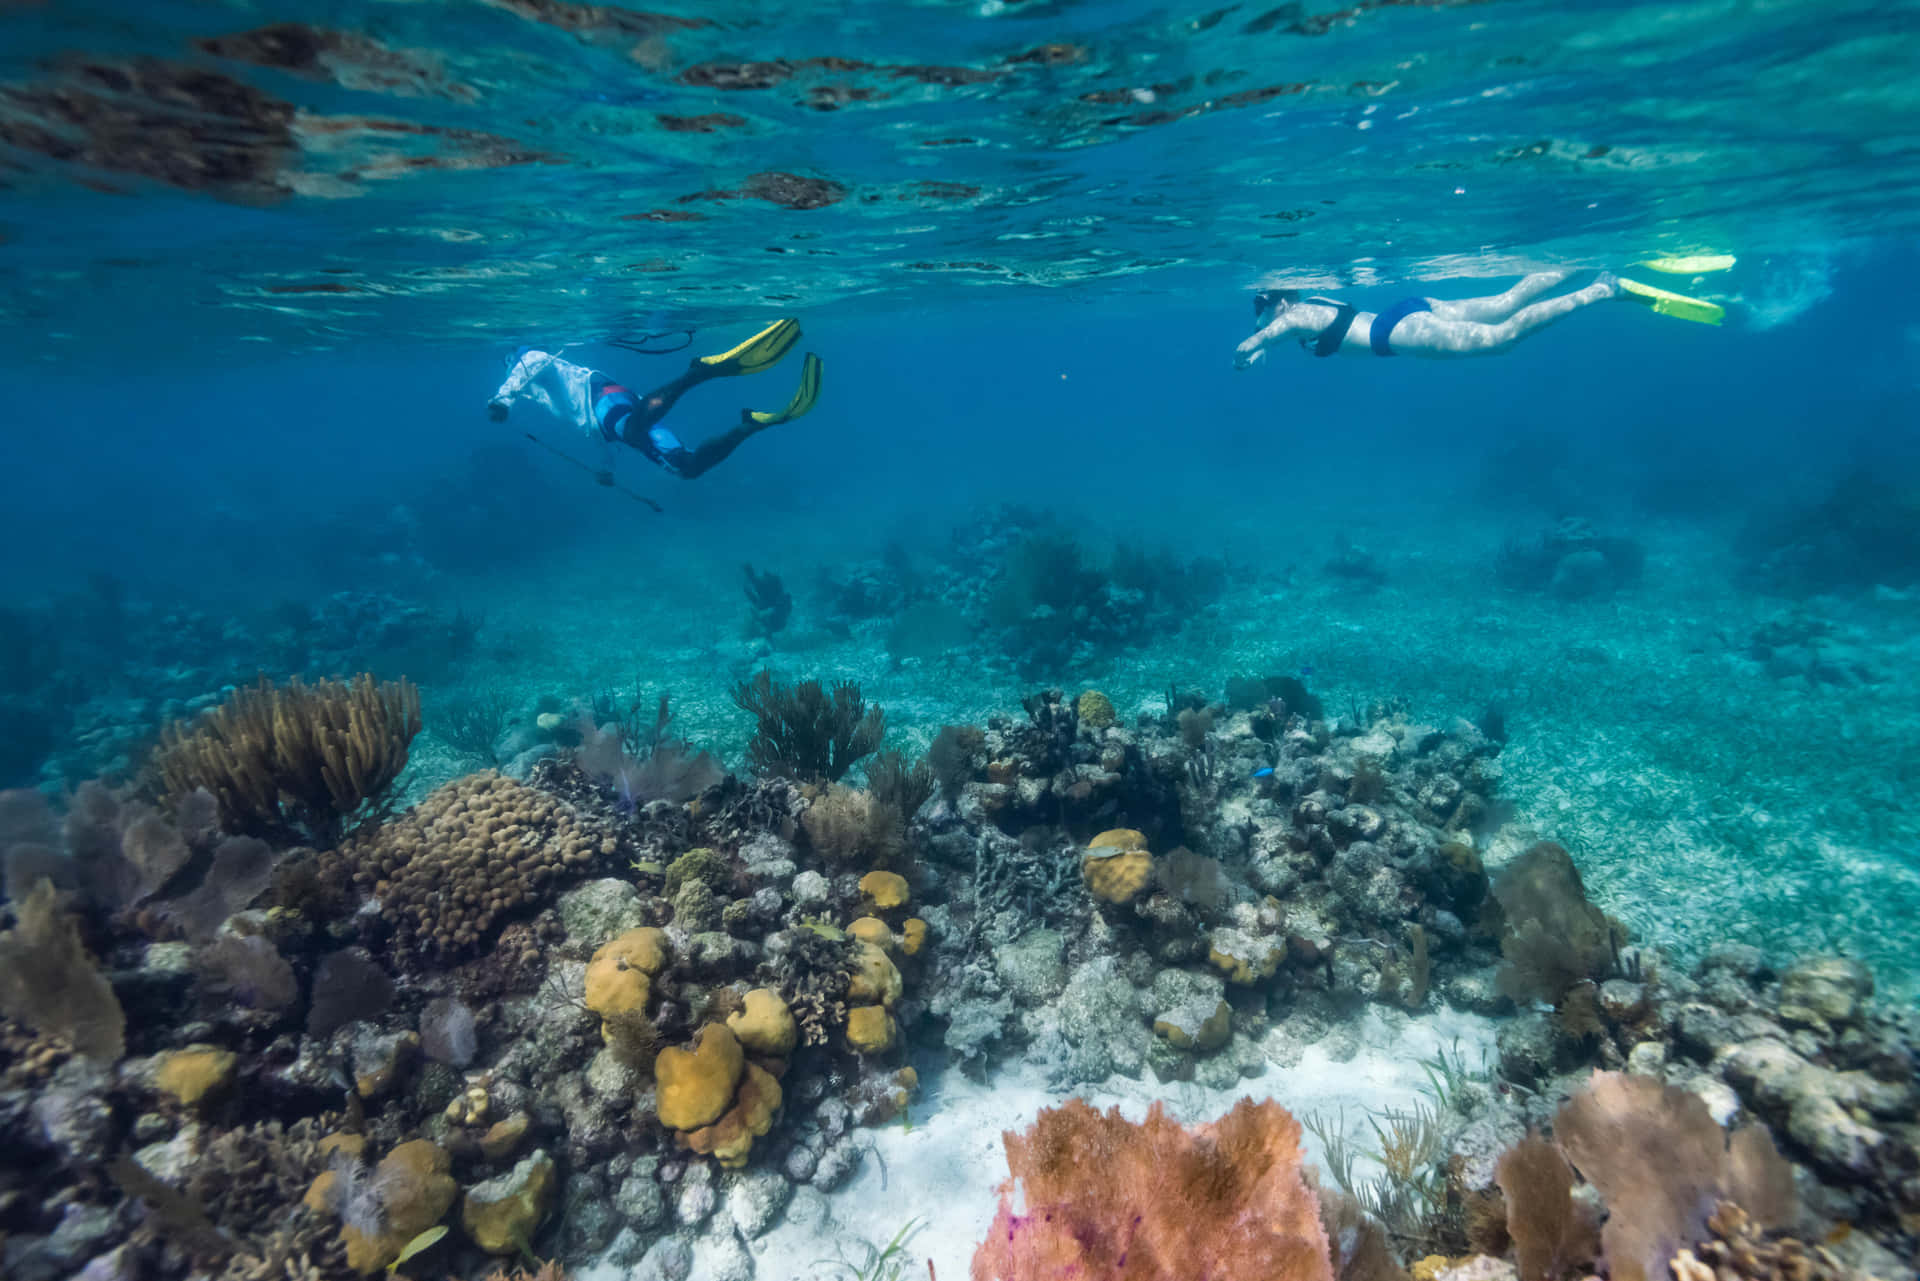 Description- A brilliant and stunning look beneath the surface of the Caribbean Sea, the image reveals a vivid landscape of colorful coral reefs and resident living creatures.